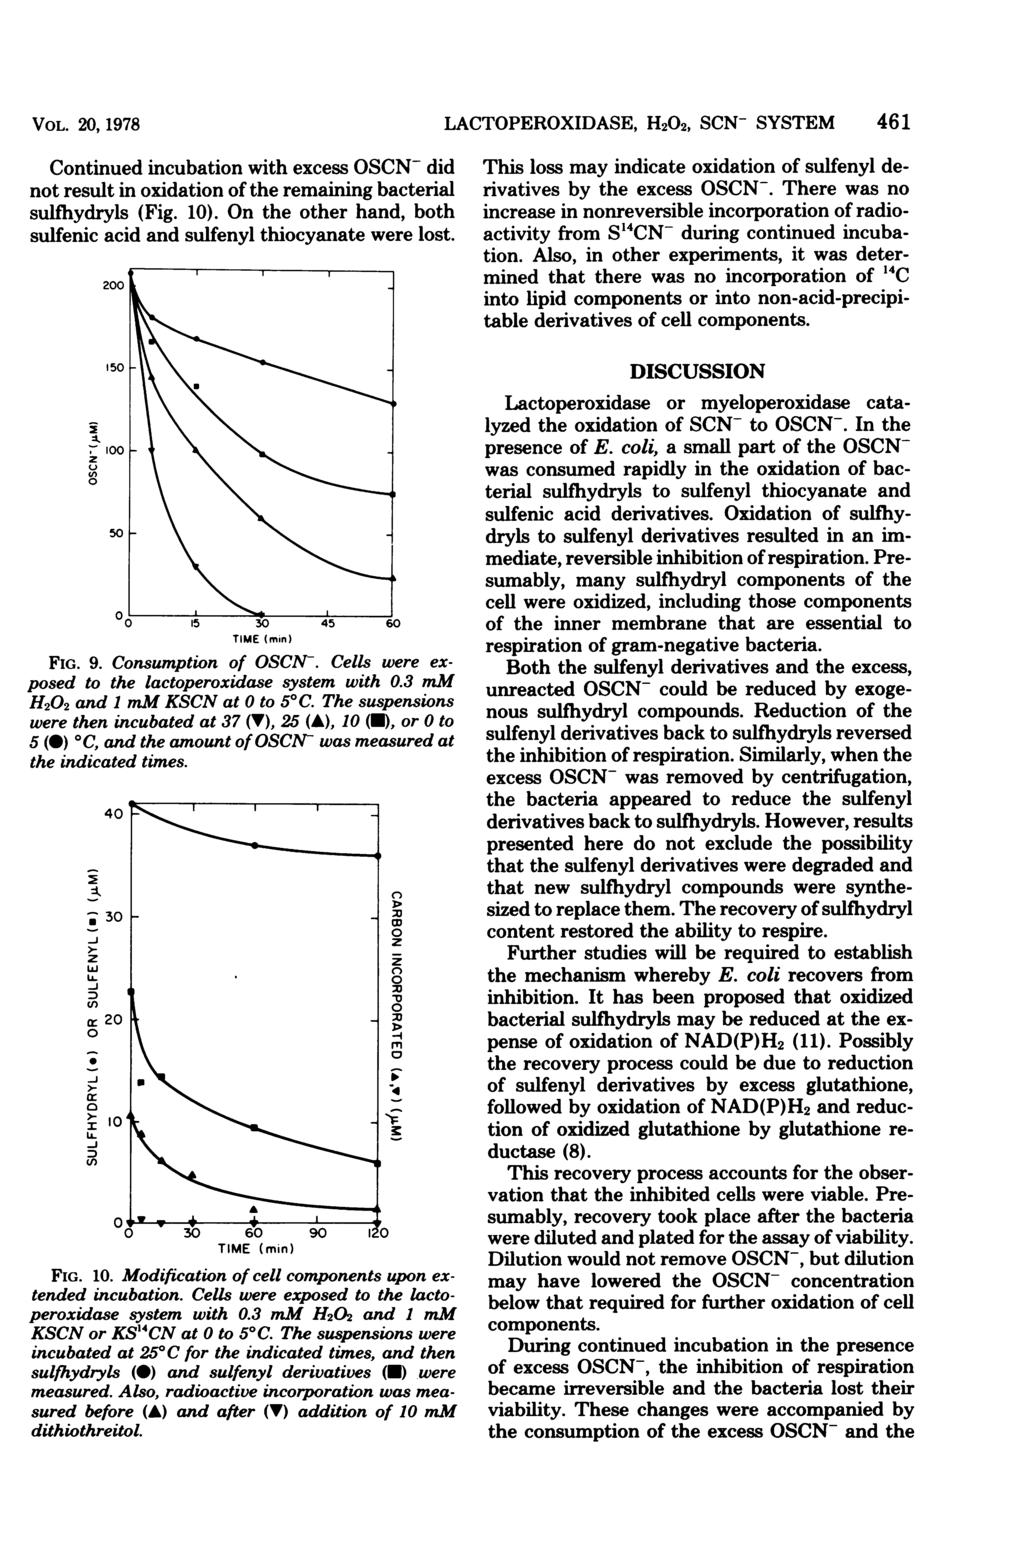 VOL. 2, 1978 Continued incubation with excess OSCN- did not result in oxidation of the remaining bacterial sulfhydryls (Fig. 1).